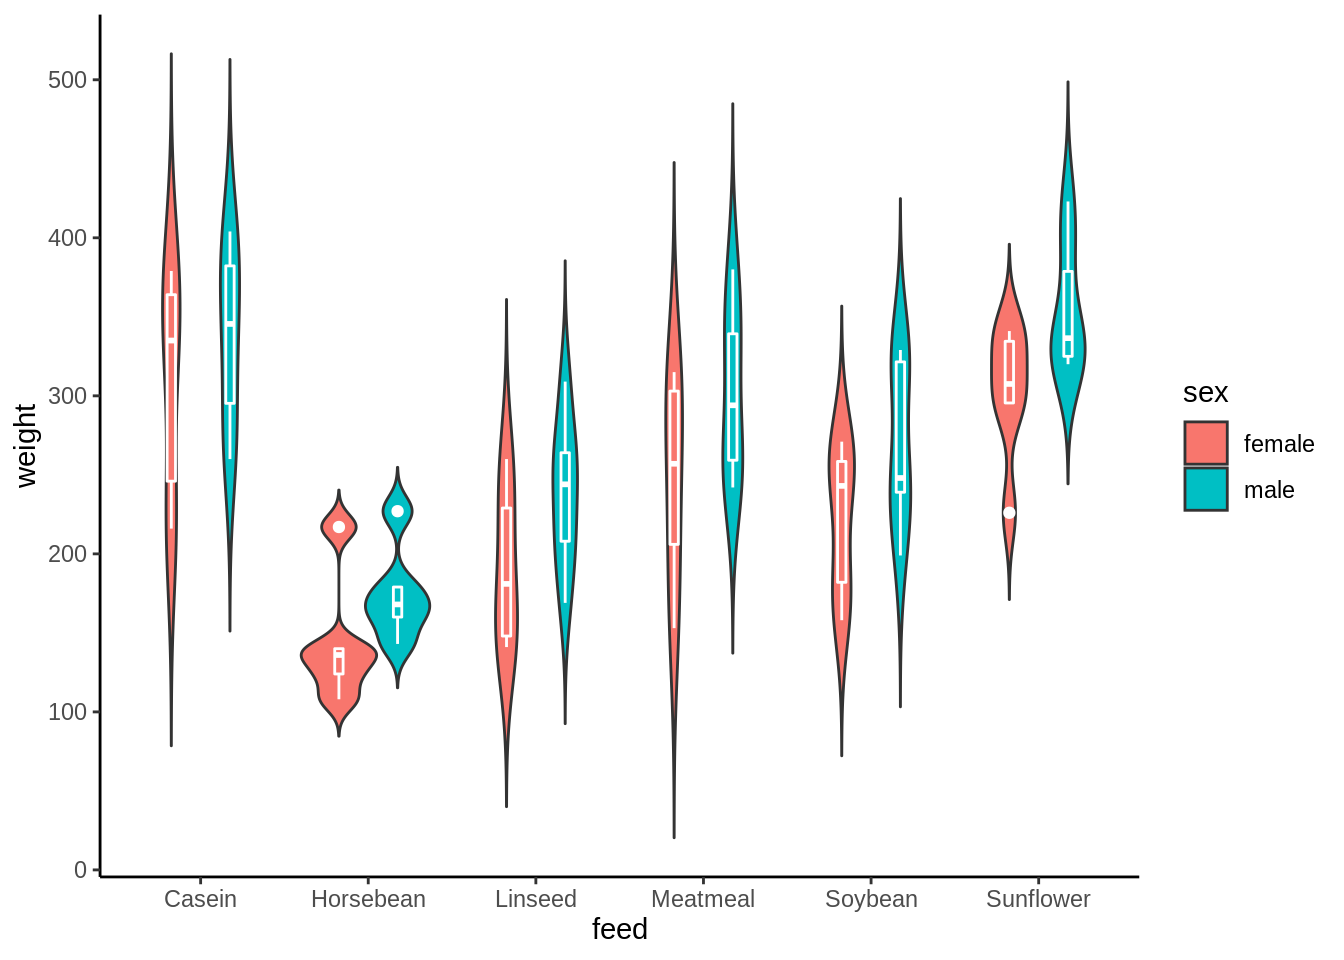 Violin plots of set size of different cohorts stratified by breast